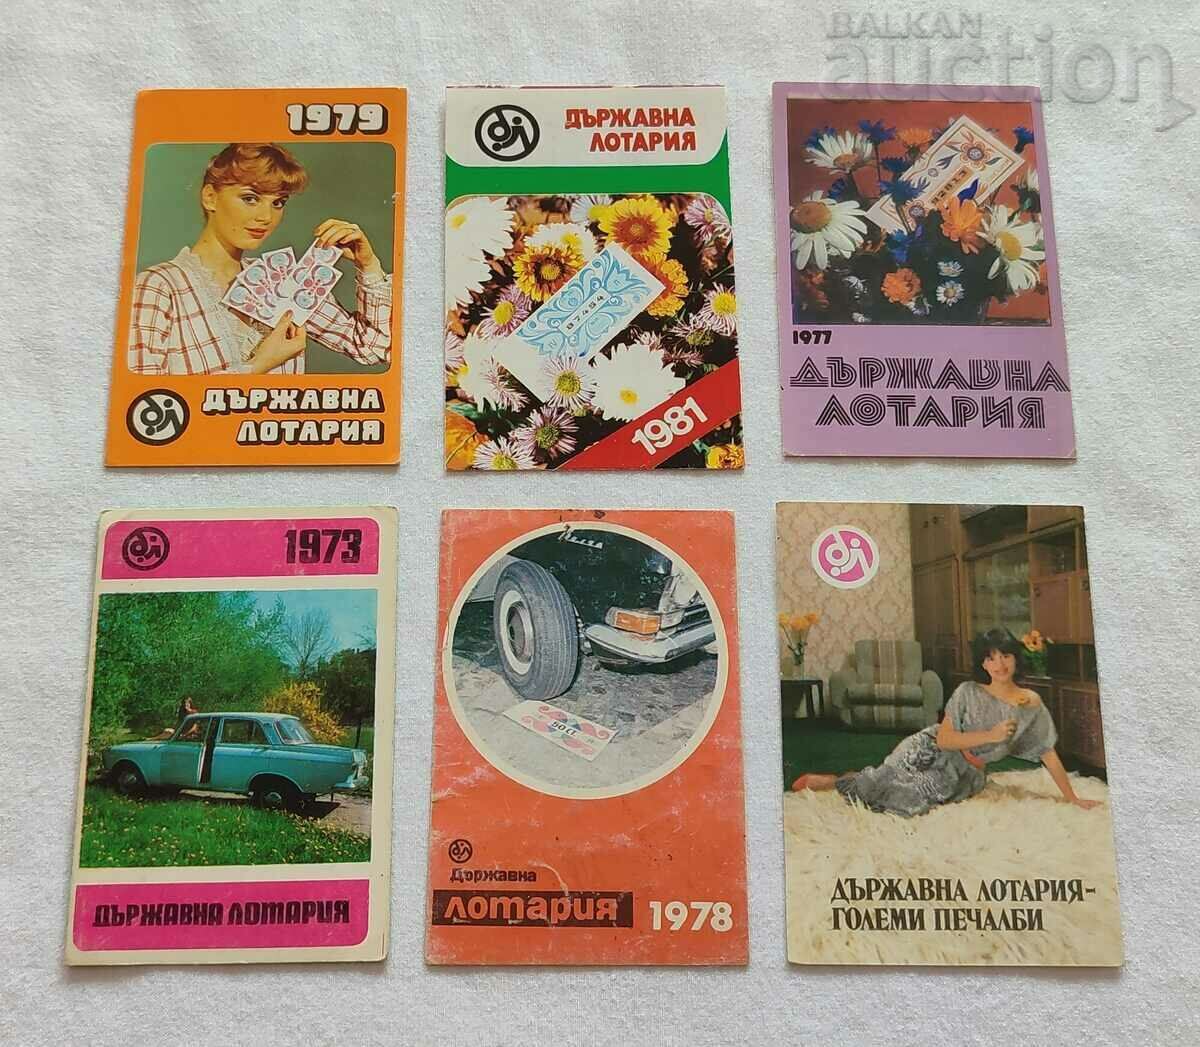 STATE LOTTERY CALENDARS 6 ISSUES 1973-86